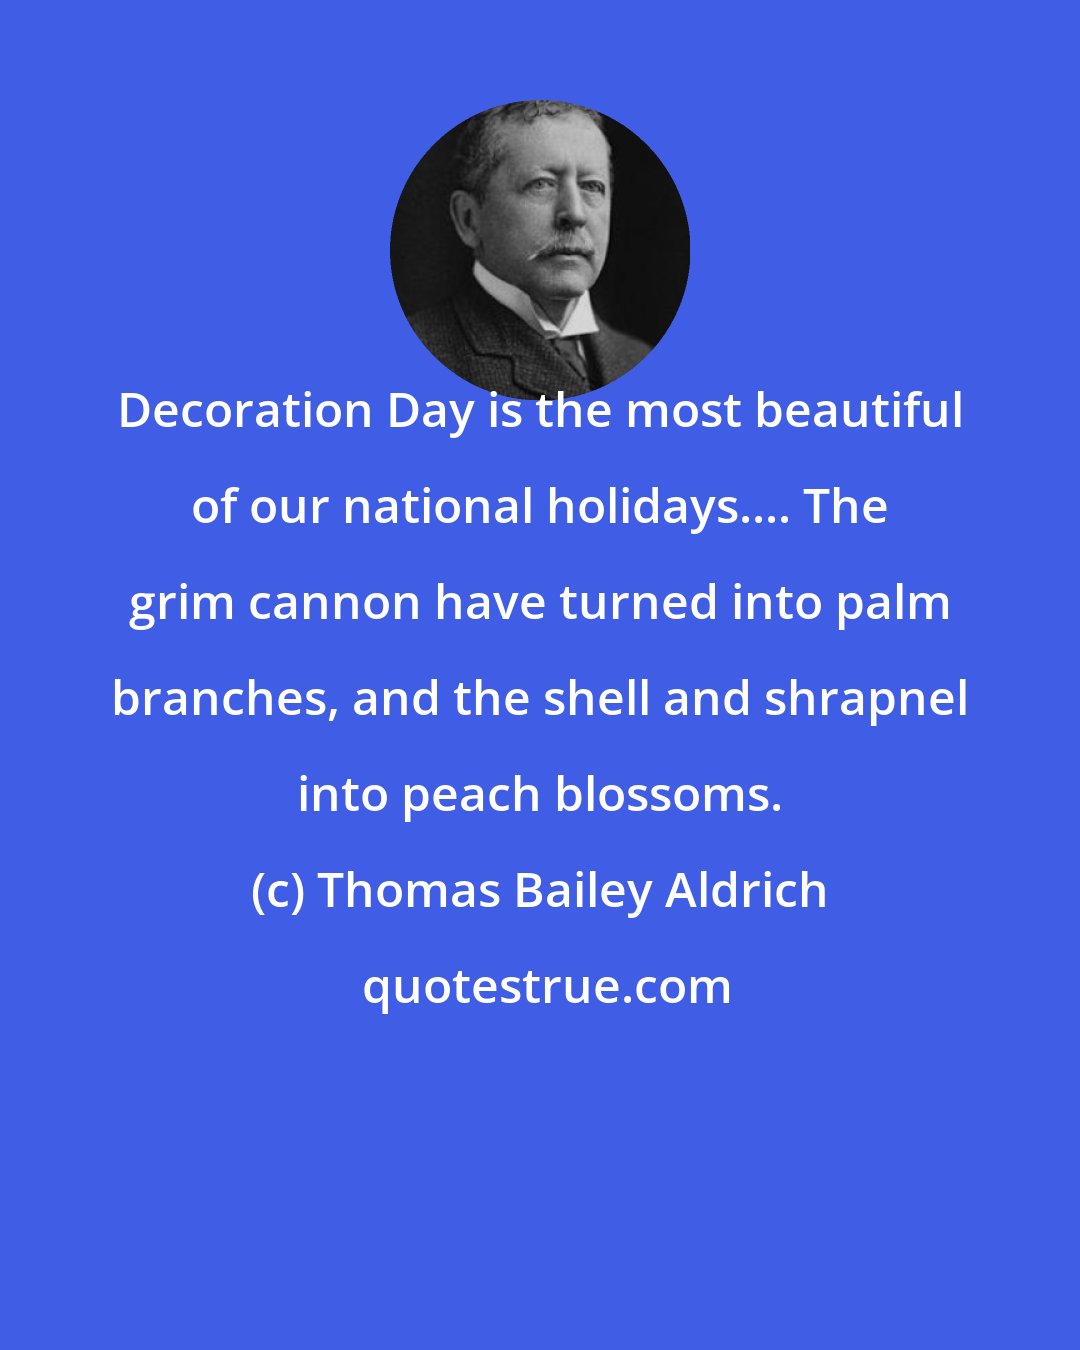 Thomas Bailey Aldrich: Decoration Day is the most beautiful of our national holidays.... The grim cannon have turned into palm branches, and the shell and shrapnel into peach blossoms.